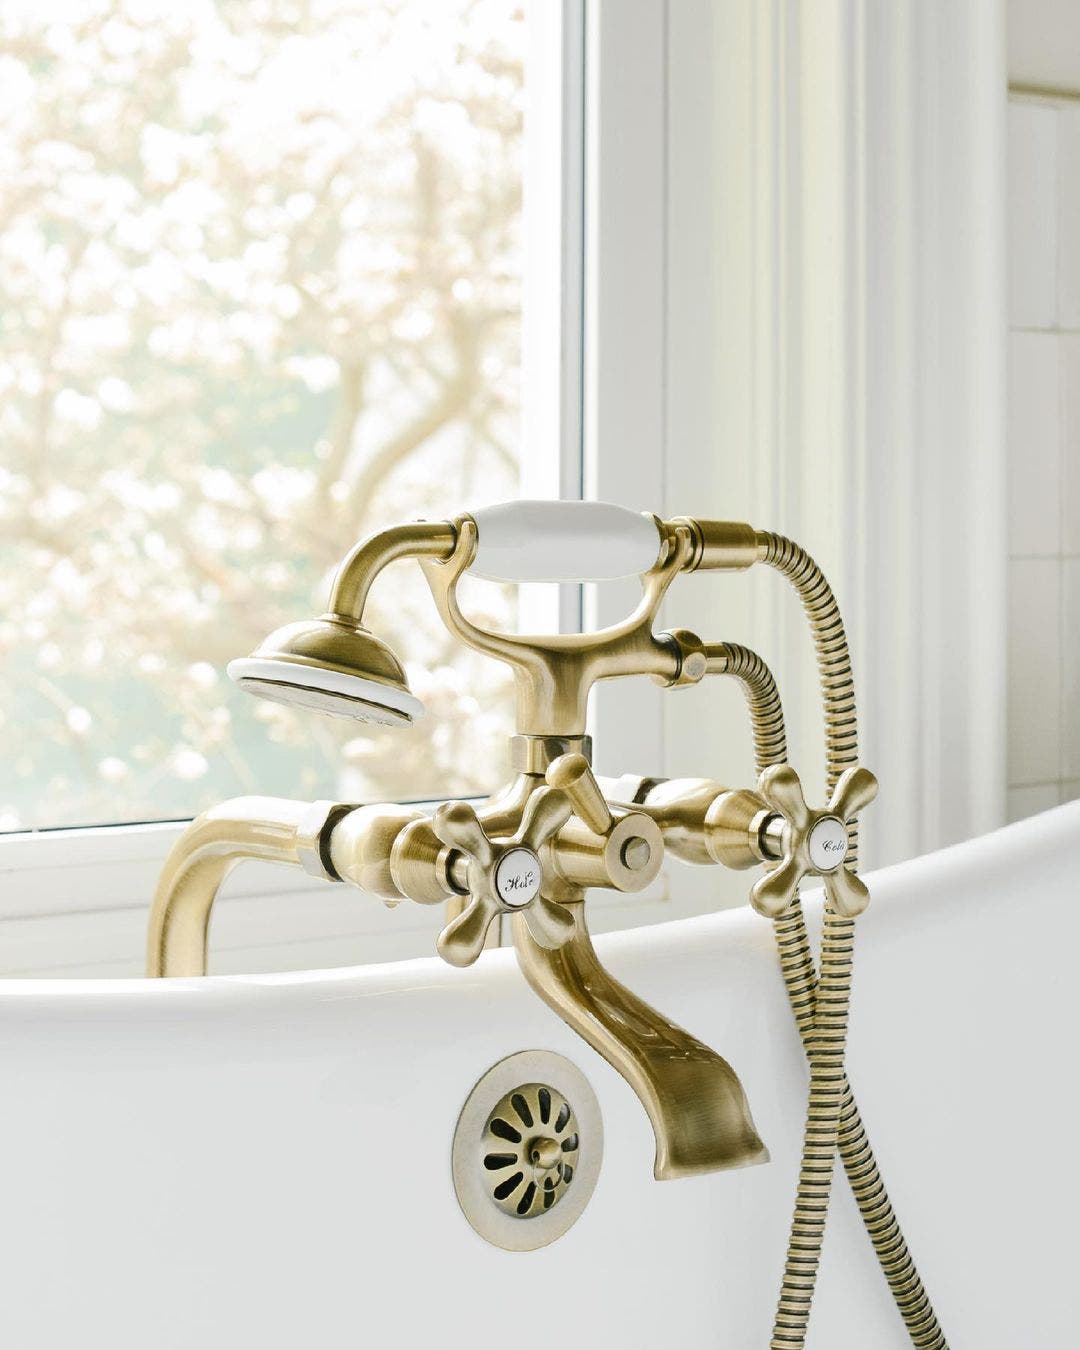 3 Beautiful Faucets to Enhance Your Small Tub